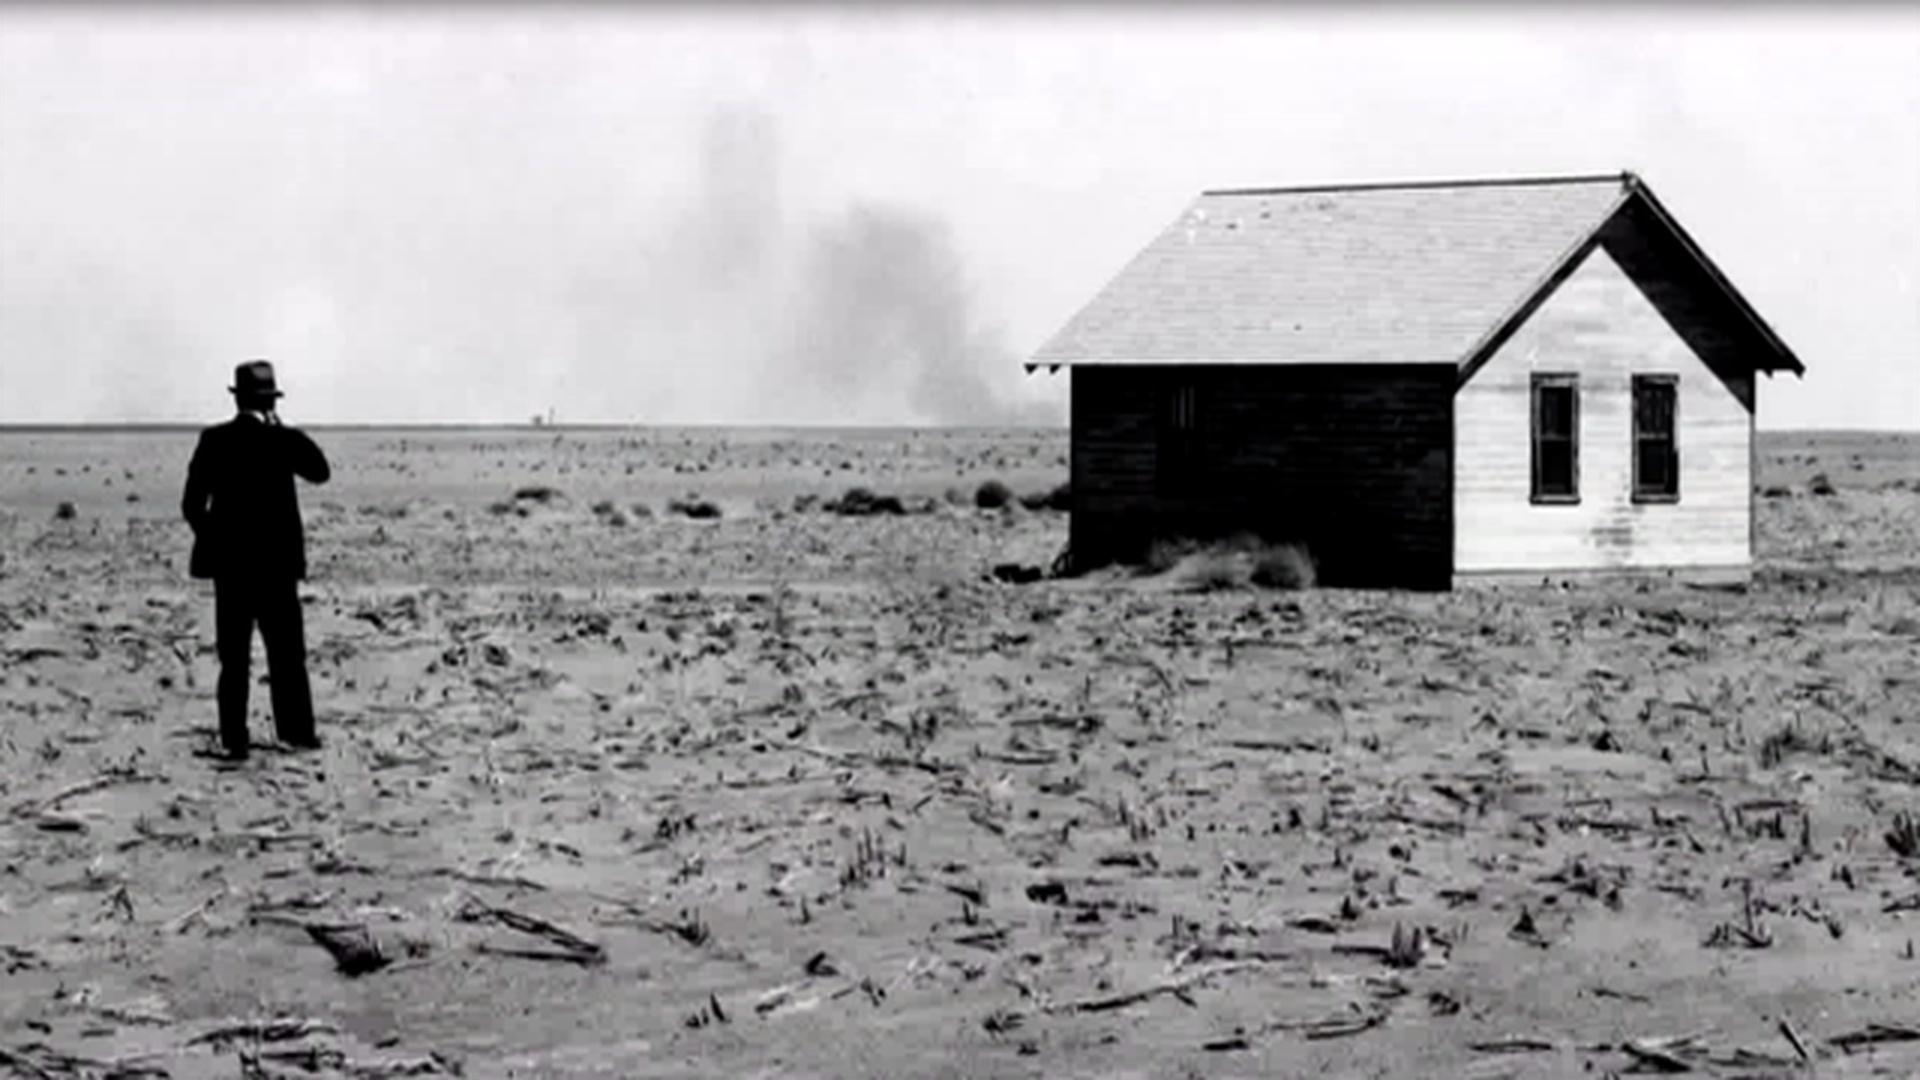 Government Reform Programs | The Dust Bowl | Programs | PBS SoCal